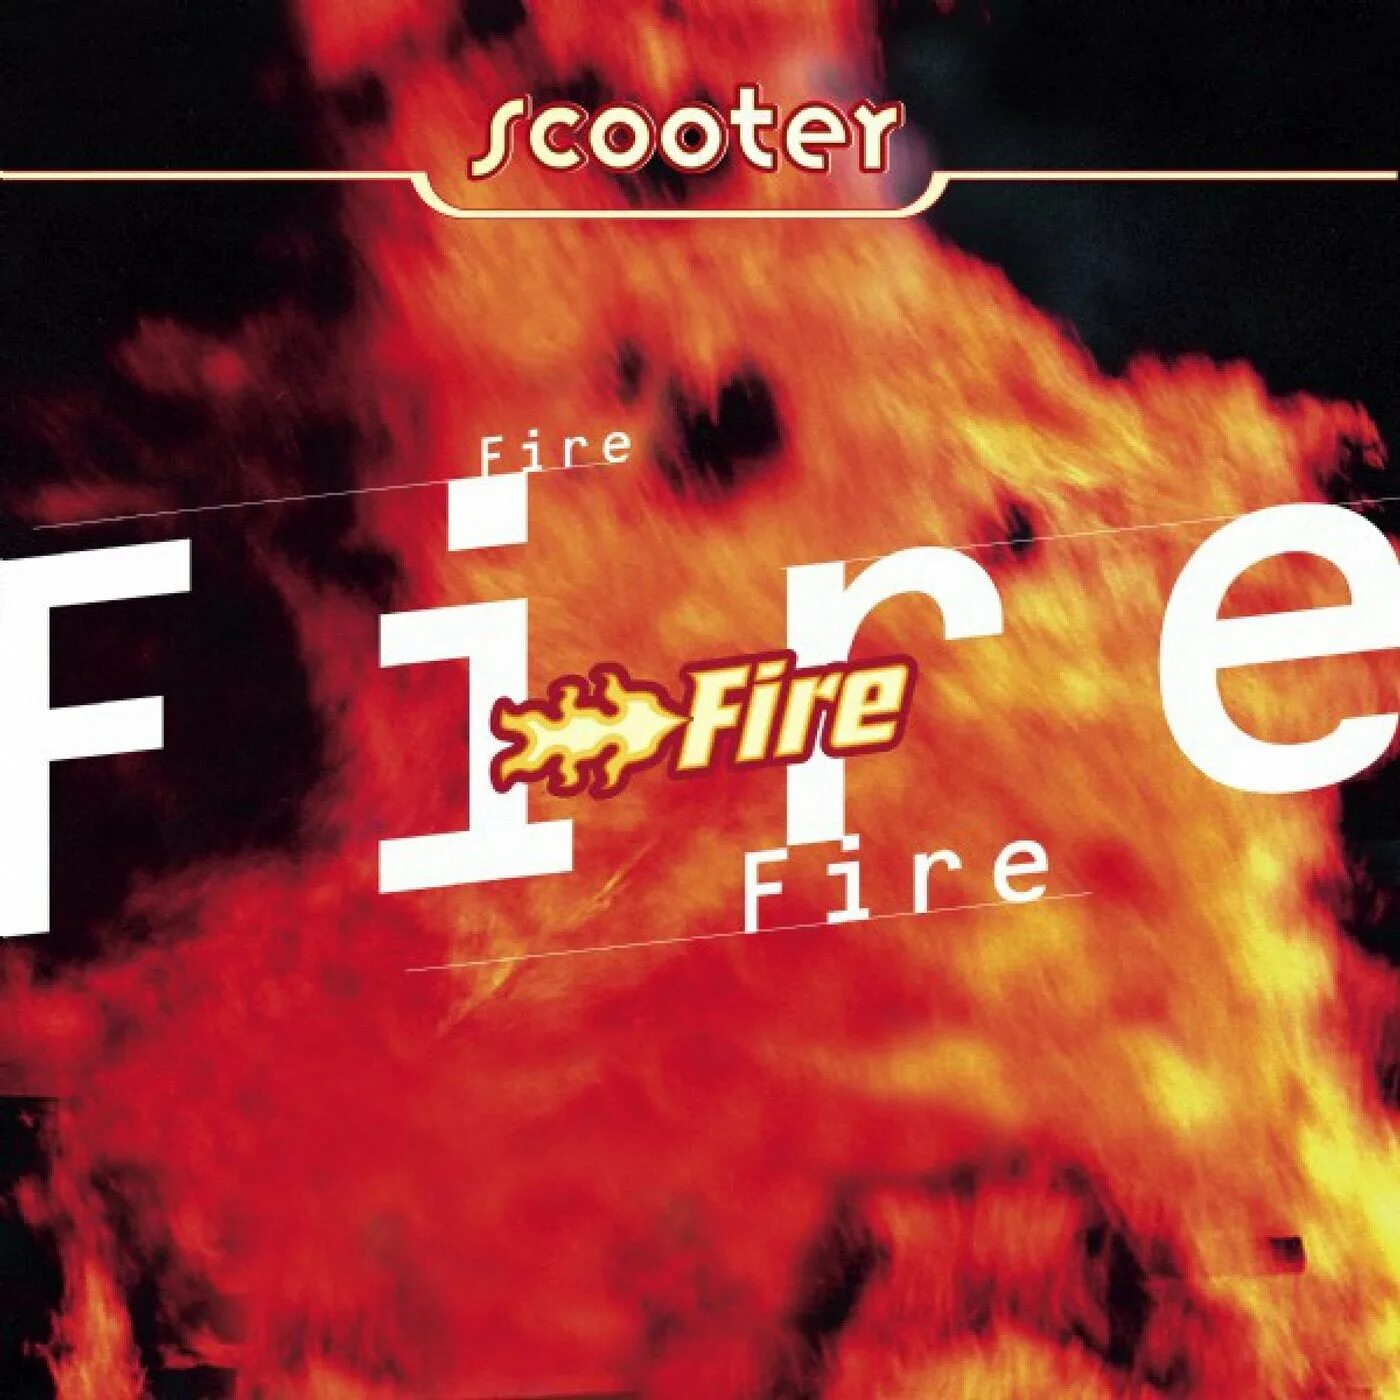 Скутер fire. Scooter Fire 1997. Scooter Fire обложка. Scooter Fire альбом. Fire Scooter Мем.